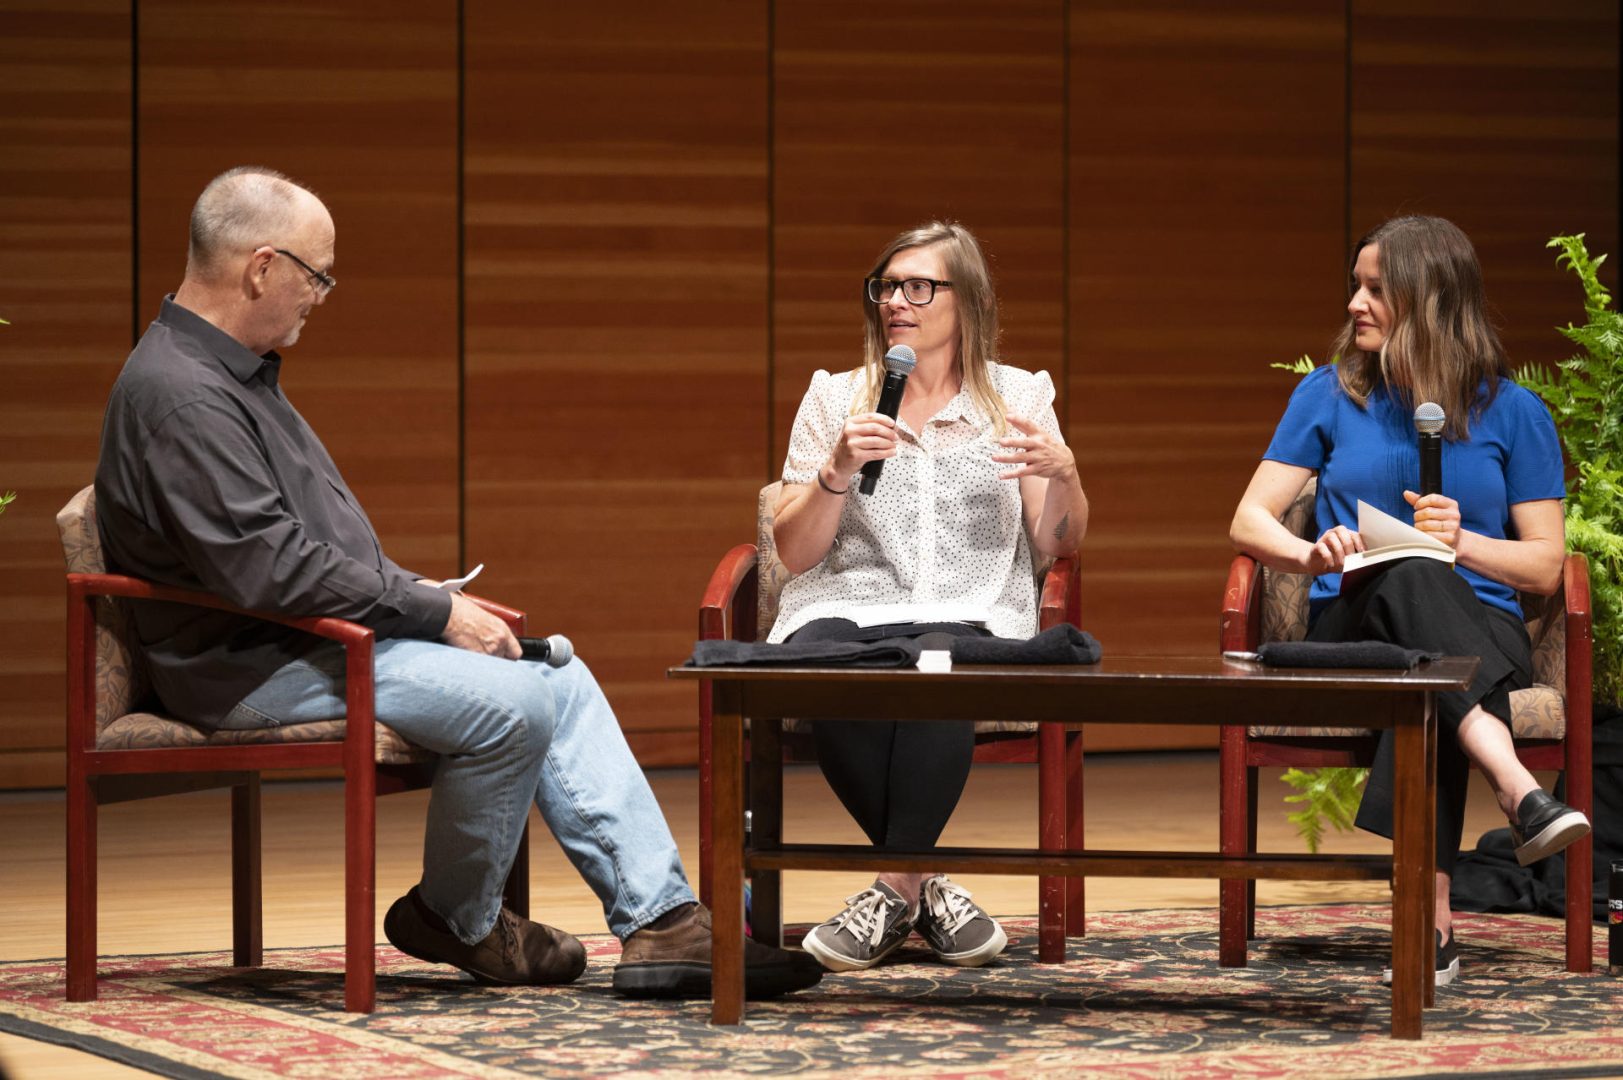 Dr. Sarah Ray and Dr. Jennifer Atkinson sit with Mark Stemen on a stage while discussing their book during a moderated event.